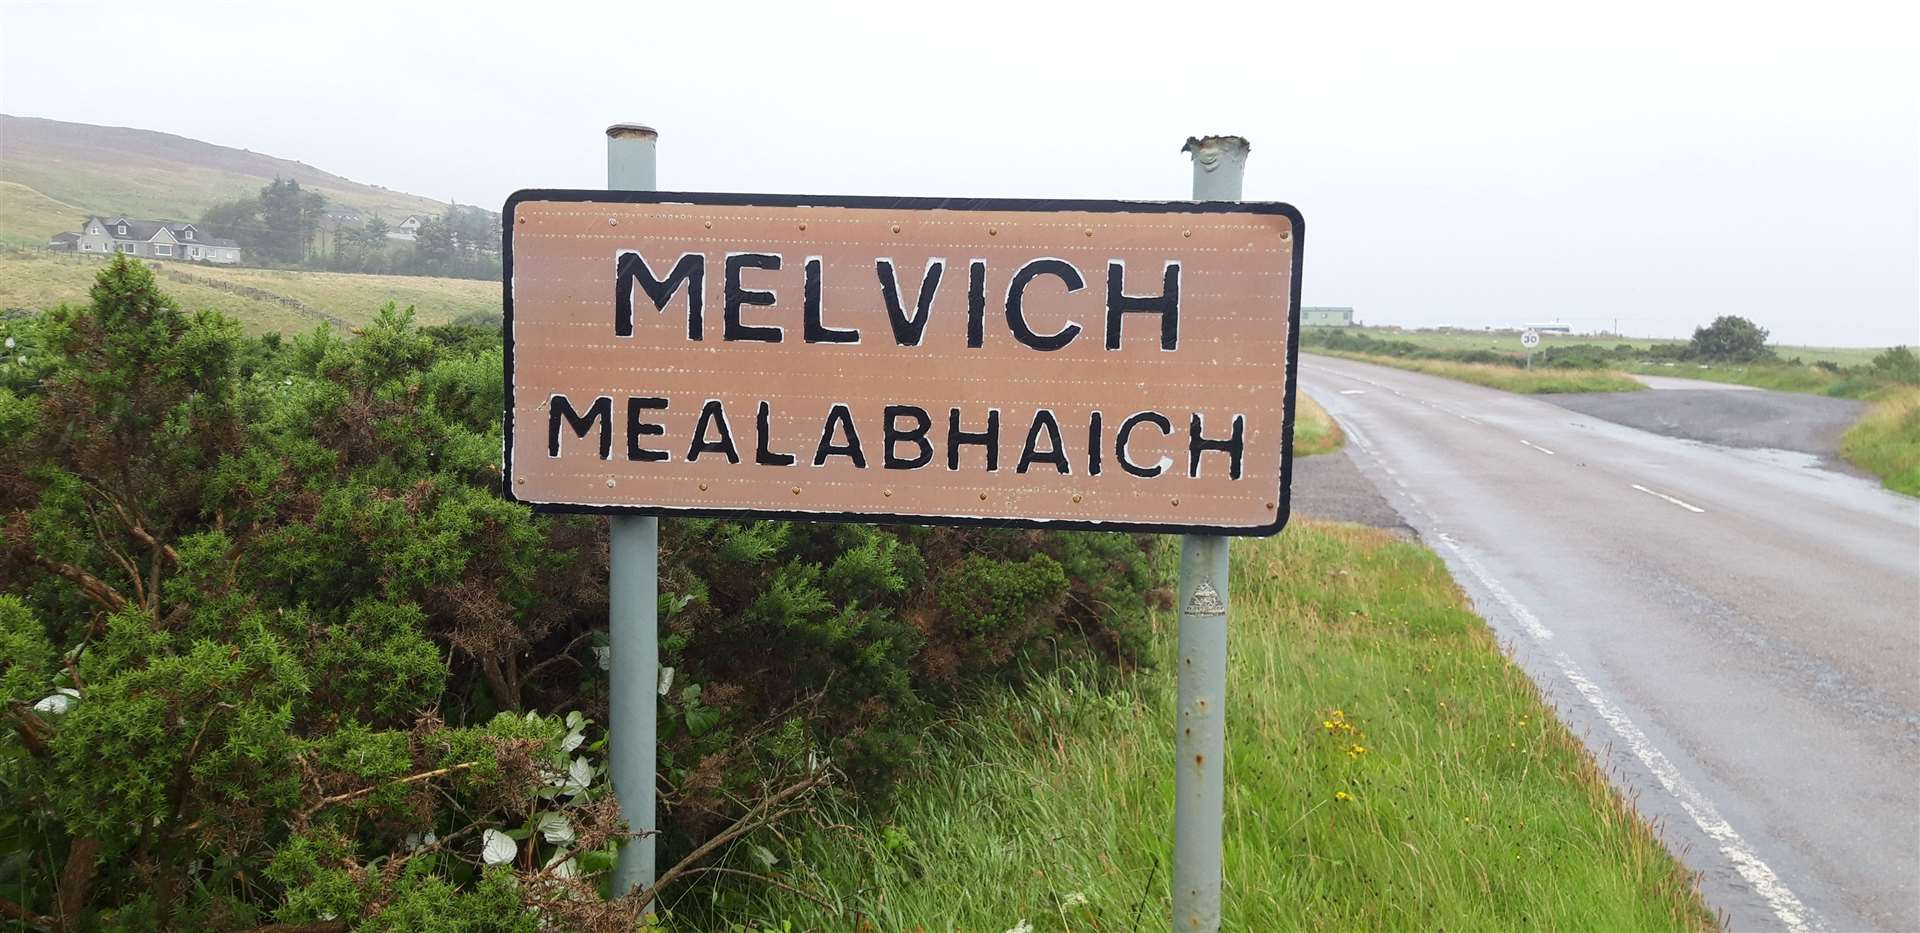 The votes for Melvich Community Council will be counted next week.